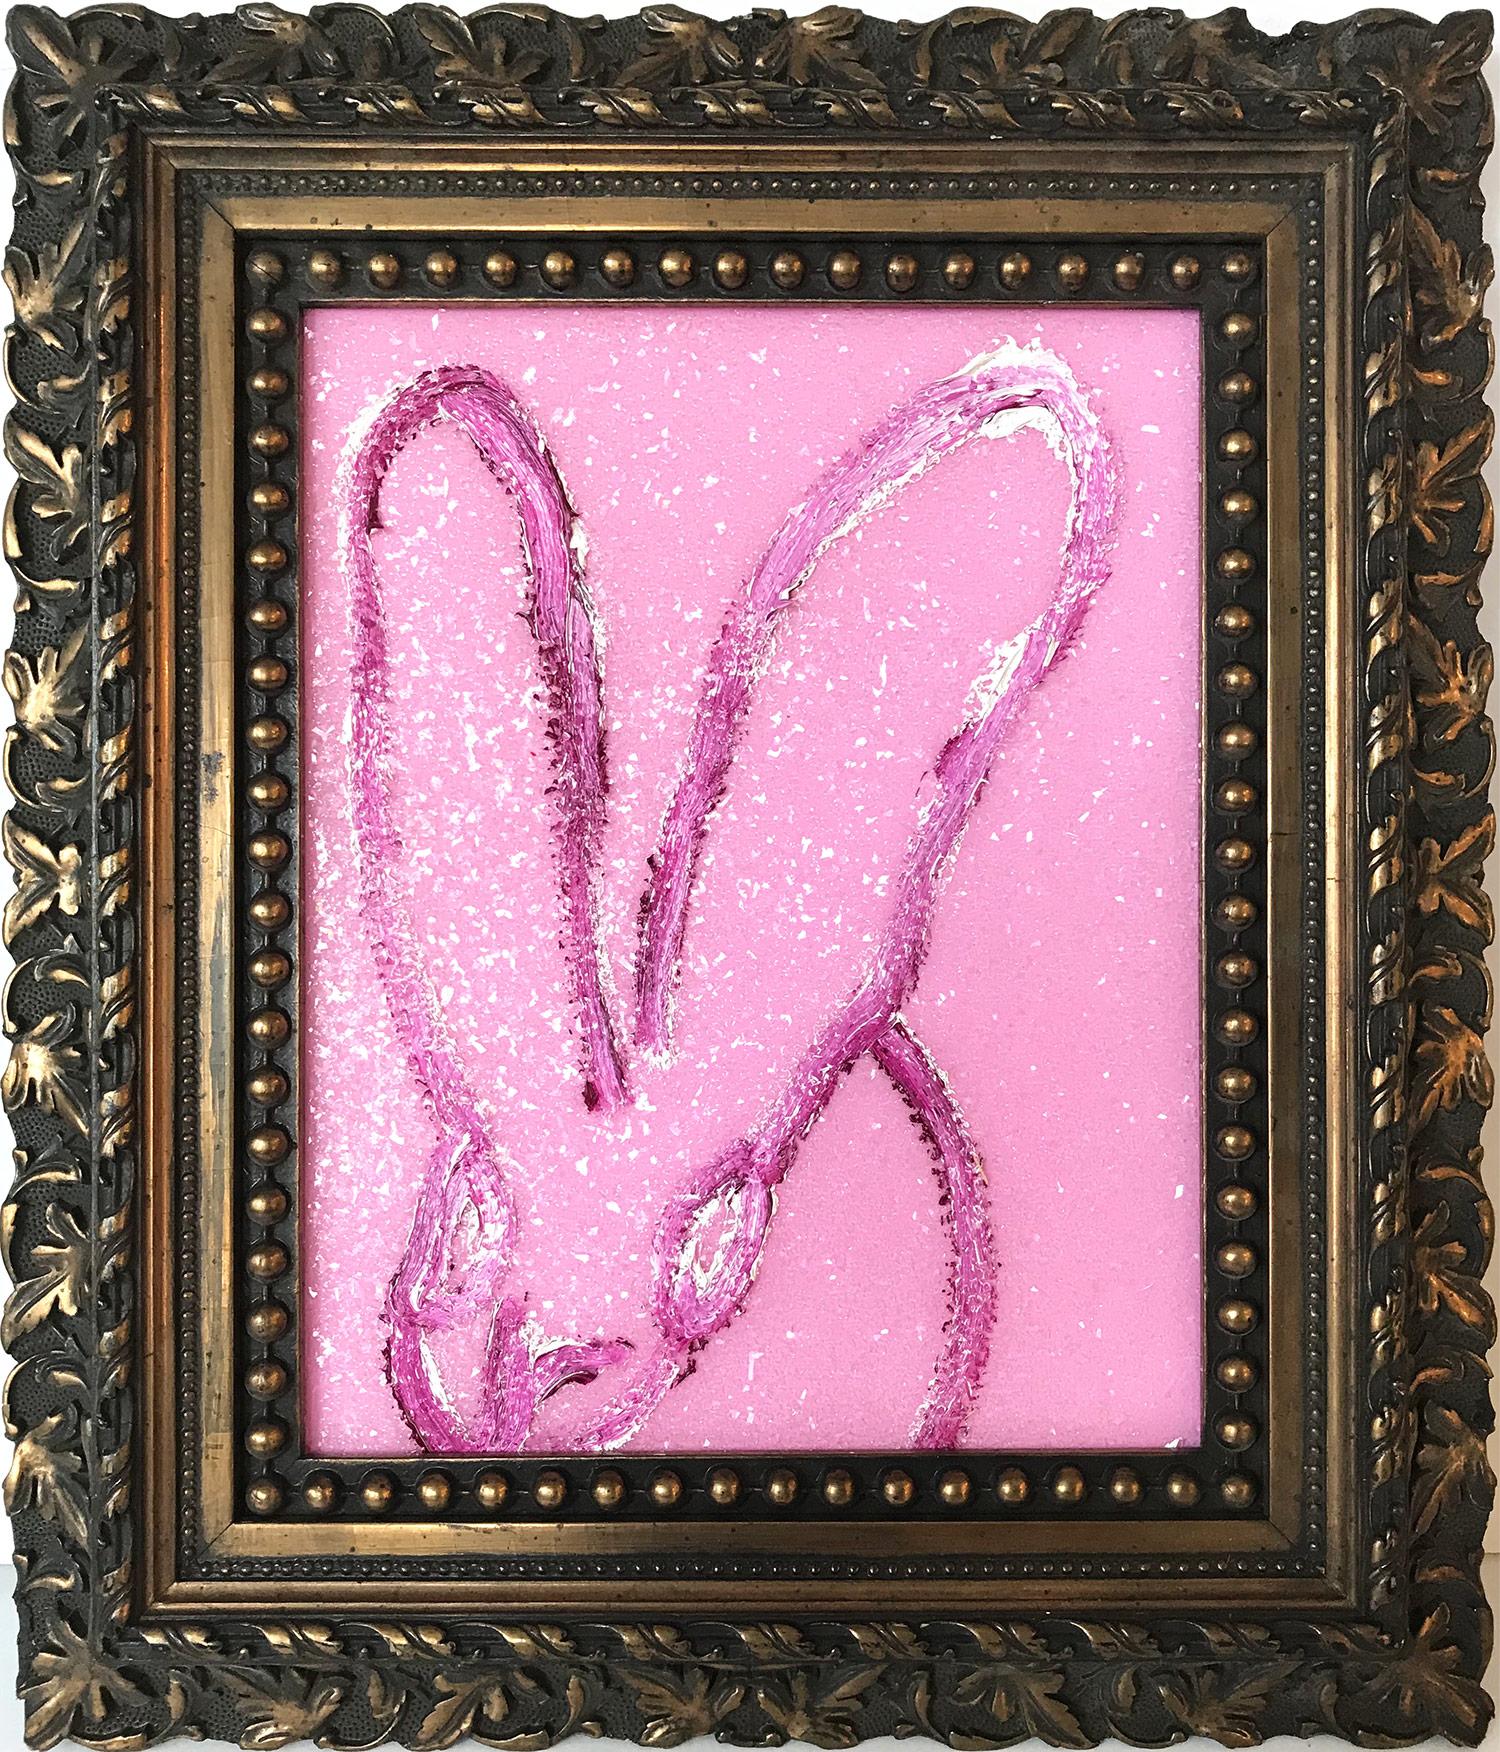 Untitled (Bunny on Pink Diamond Dust) - Painting by Hunt Slonem